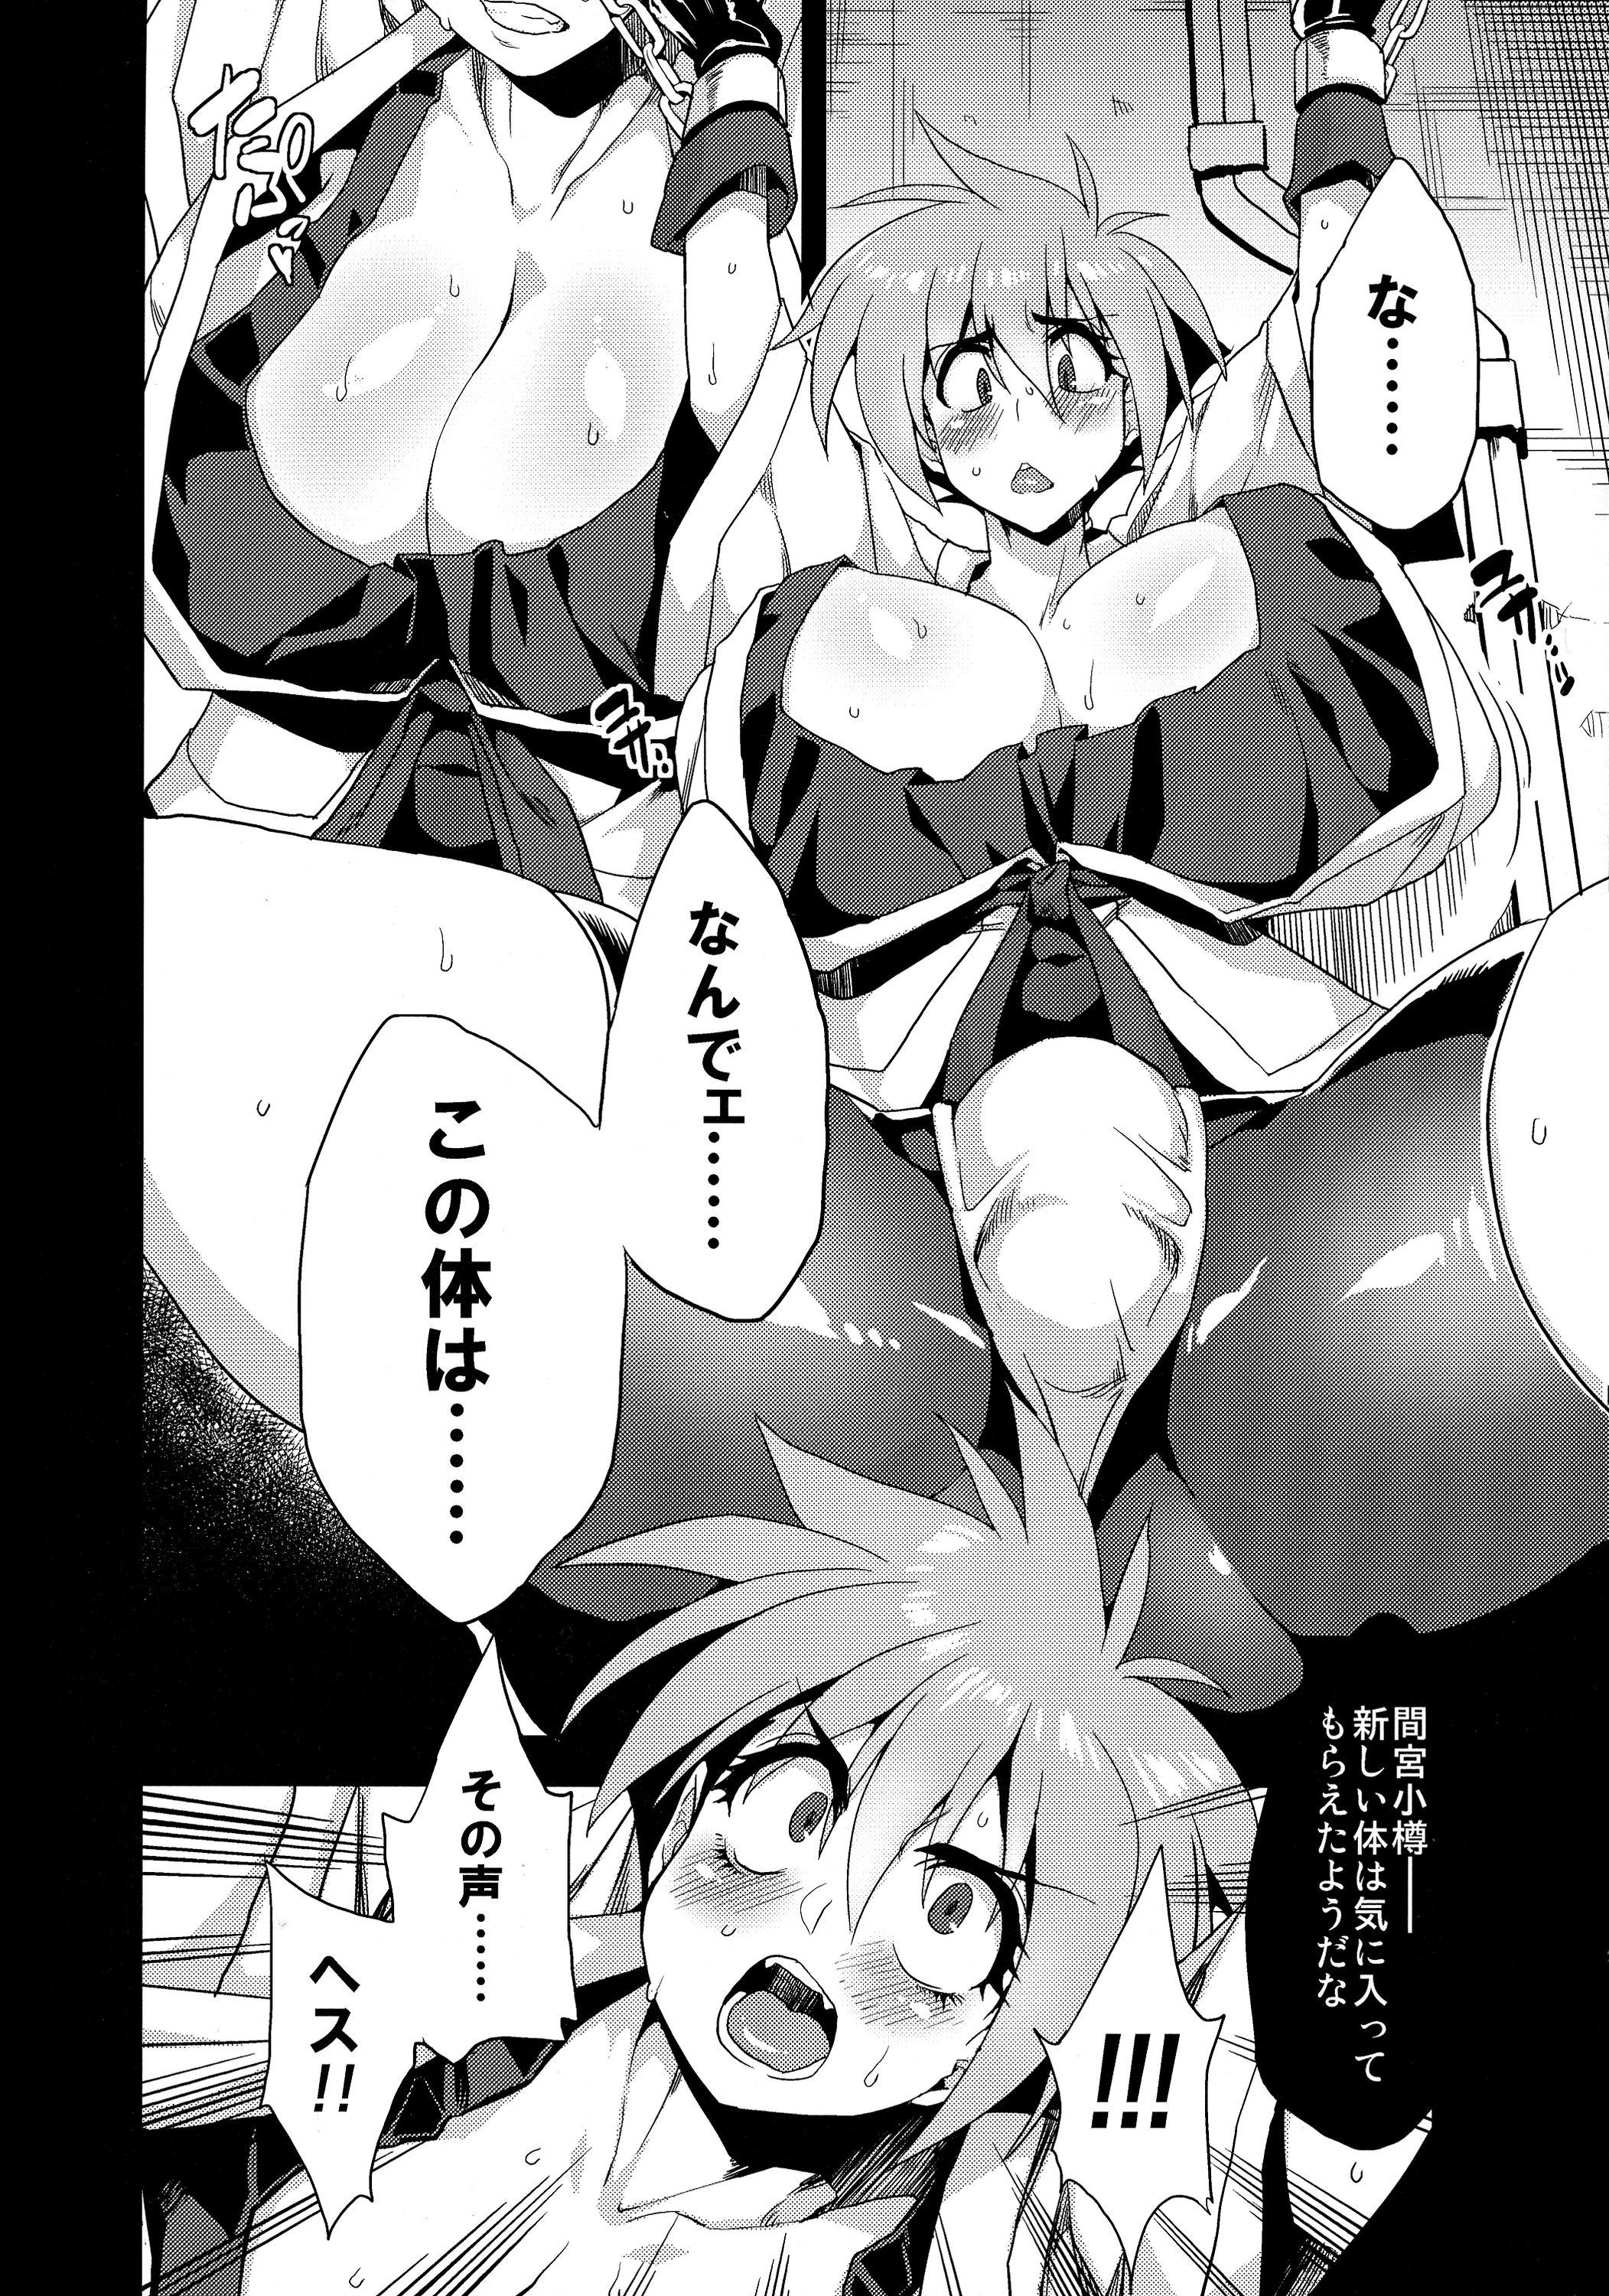 Pussy Sex Hentai Marionette 3 - Saber marionette Softcore - Page 4